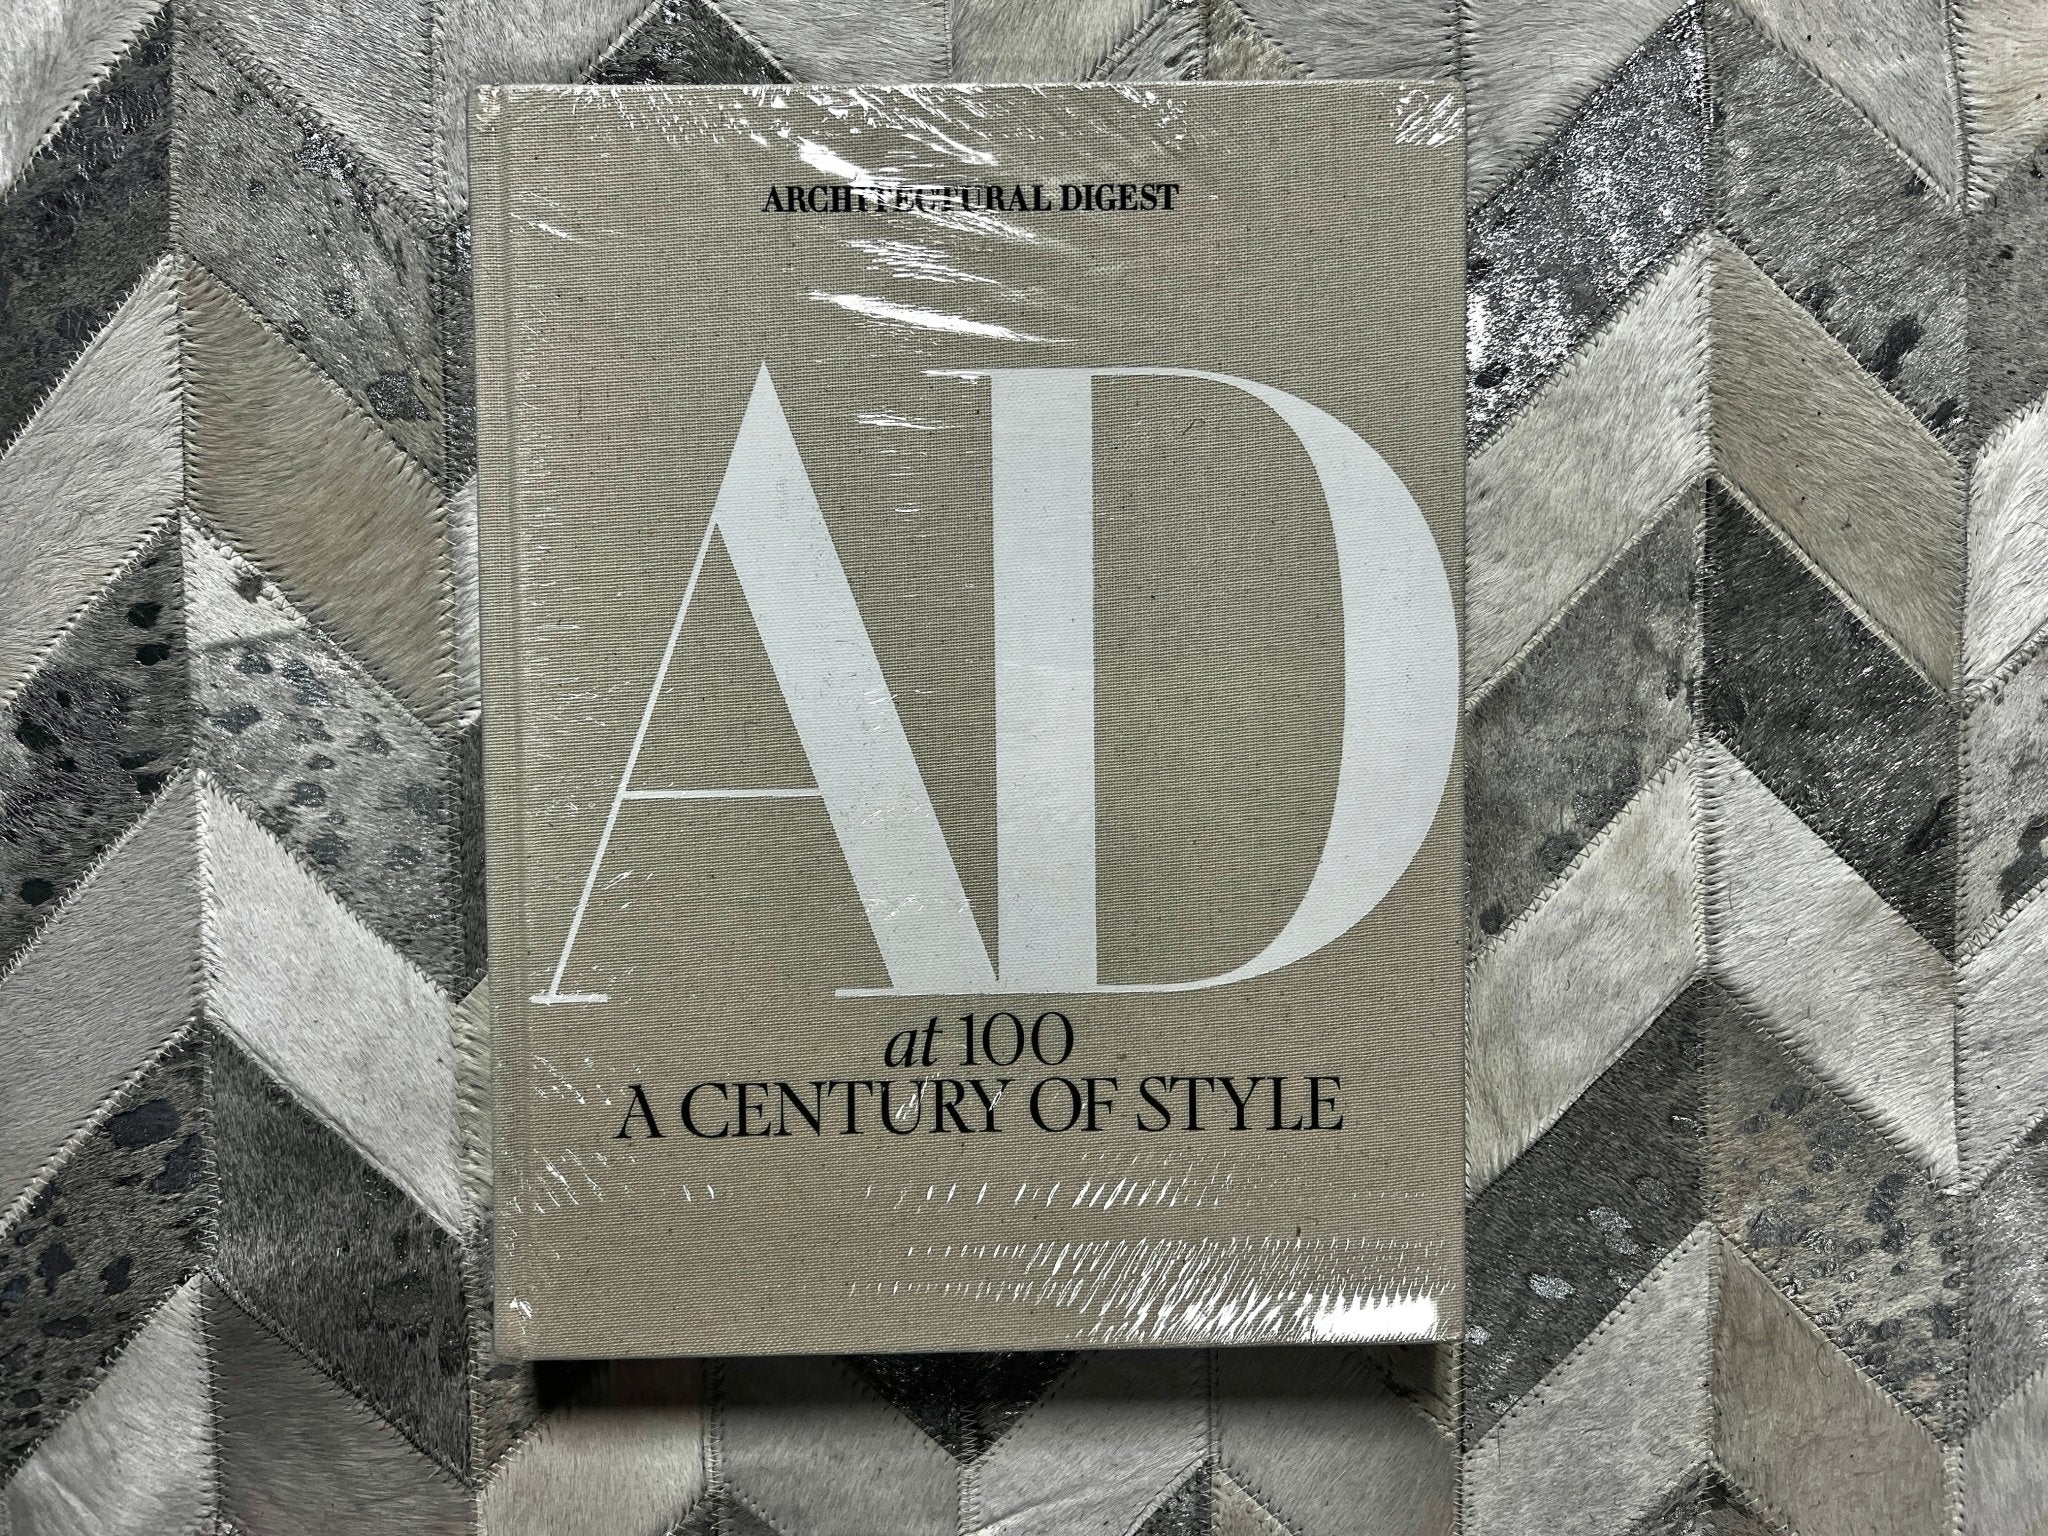 Architectural Digest at 100 Designer Coffee Table Book